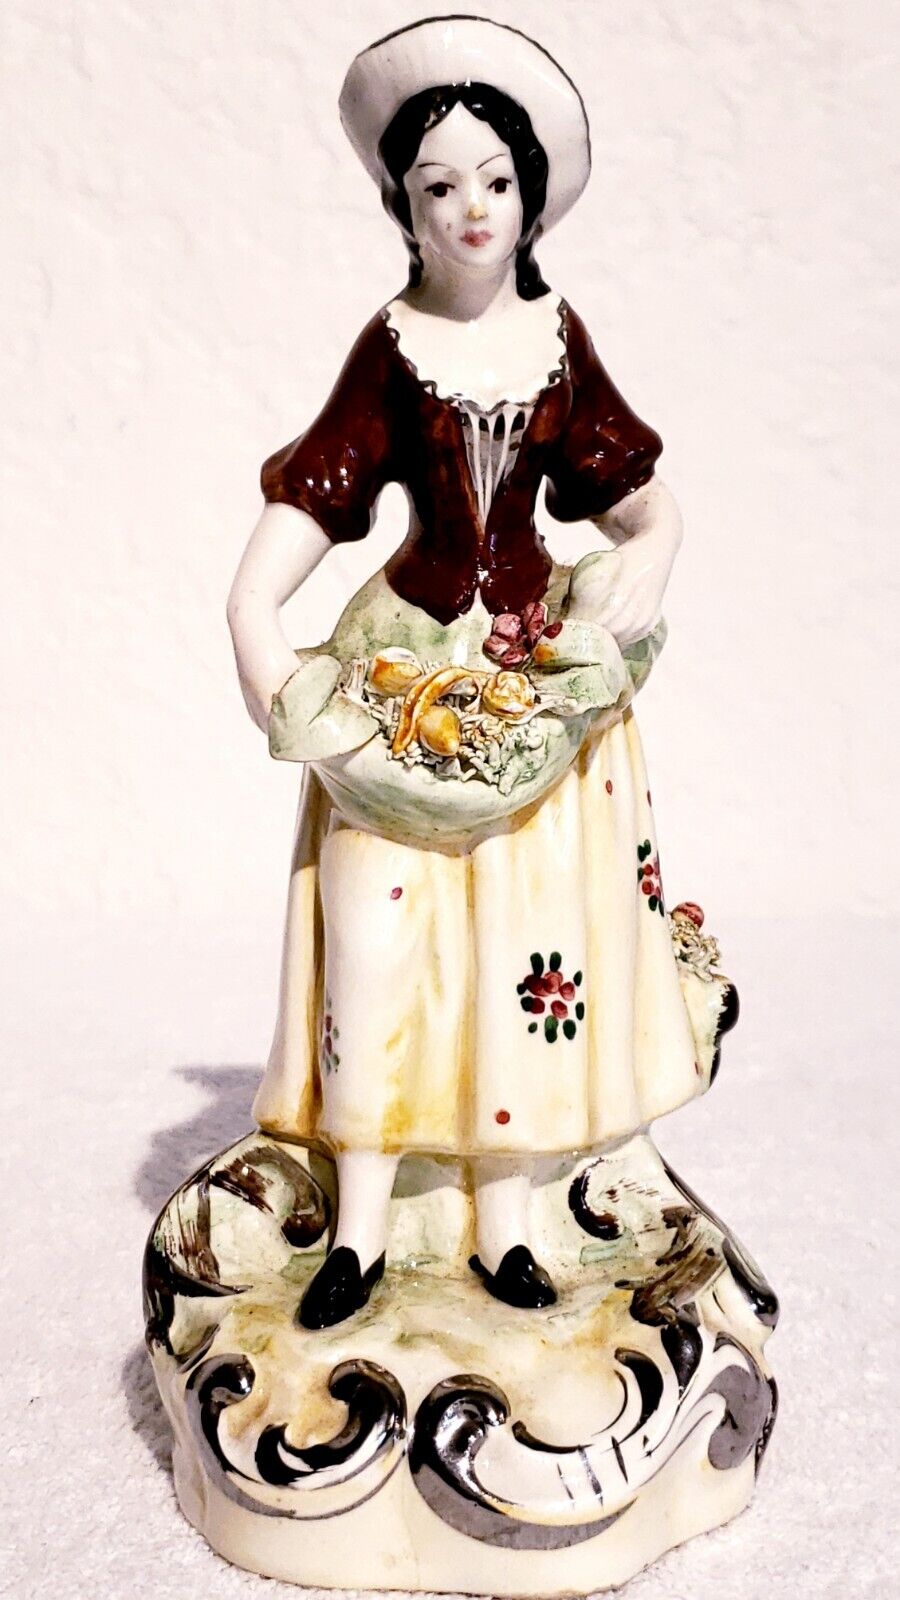 Rare Original Creation by KB Made in Italy Lady Holding a Fruit Basket  Figure. 